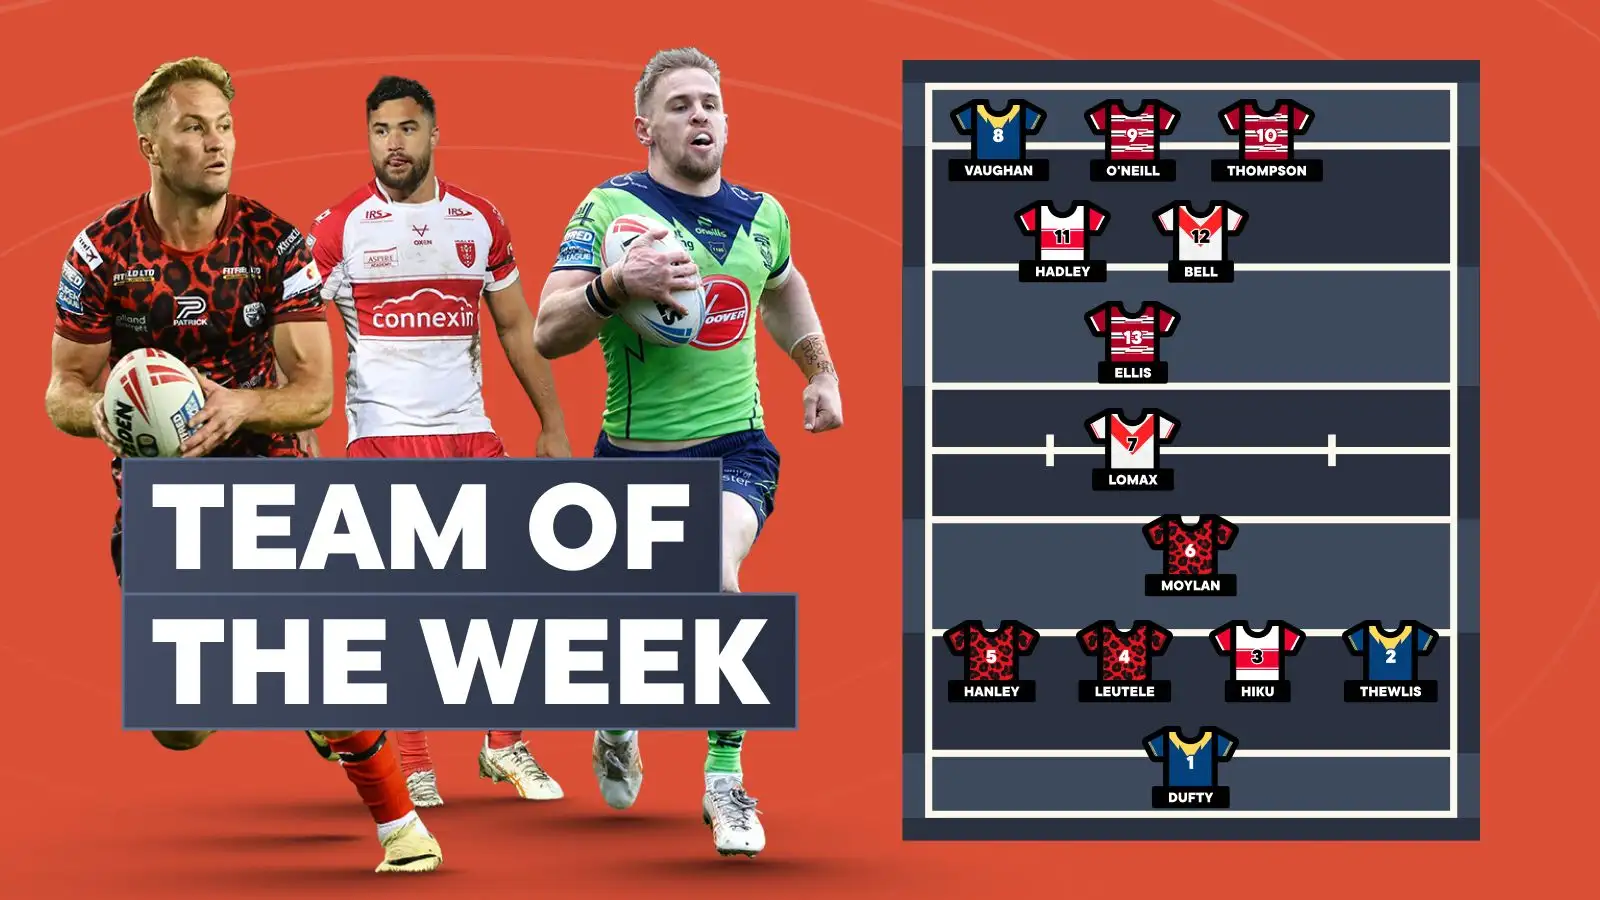 Super League Team of the Week from Round 5: Dufty, Hiku, Moylan..